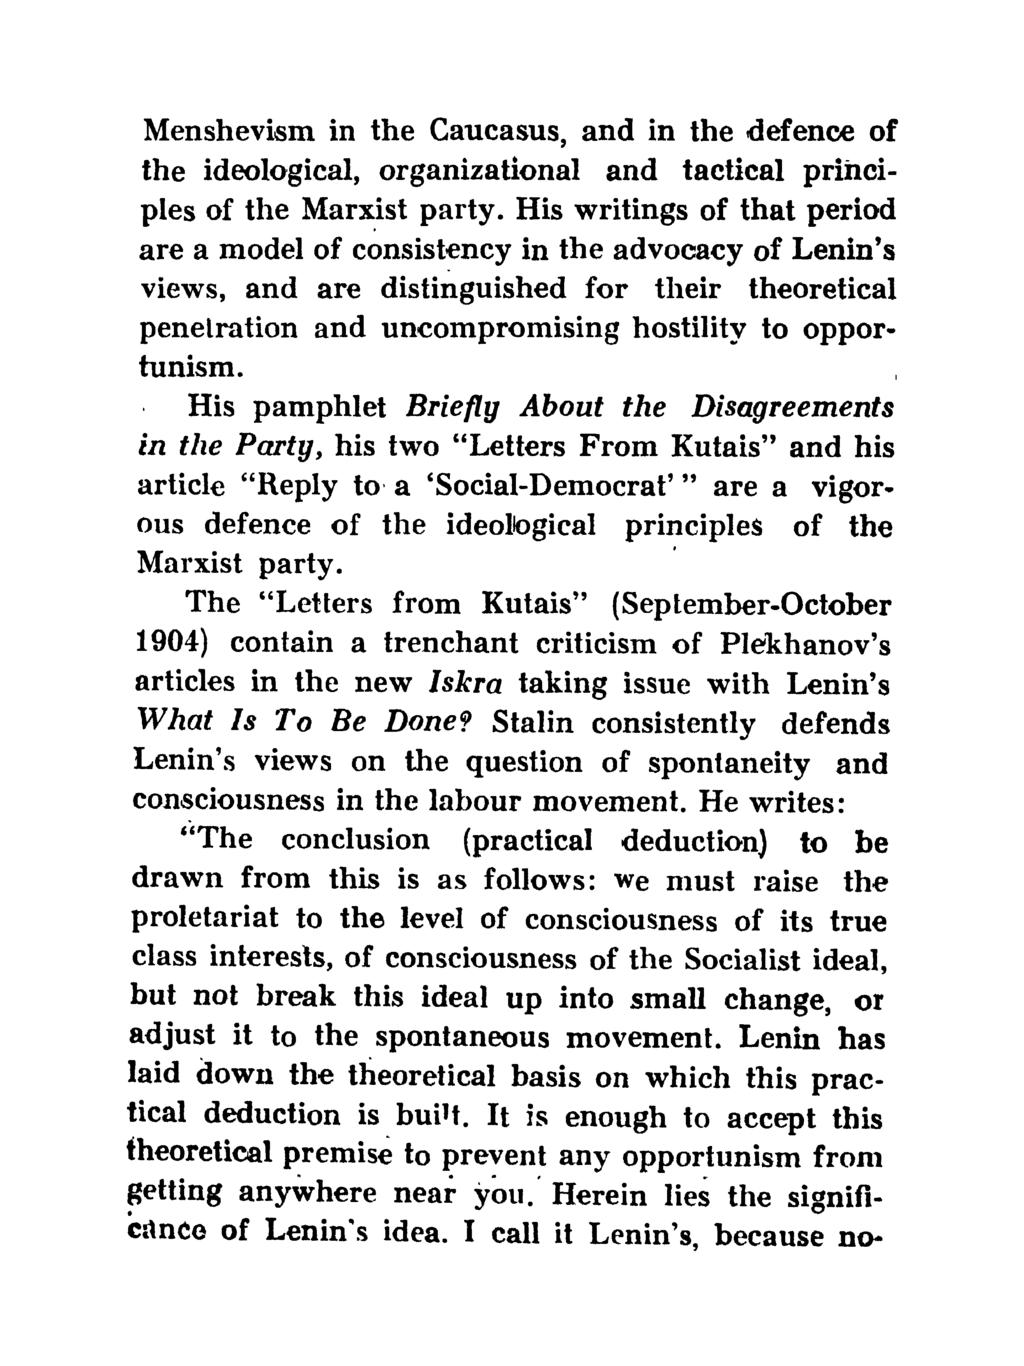 Menshevism in the Caucasus, and in the defence of the ideological, organizational and tactical principles of the Marxist party.